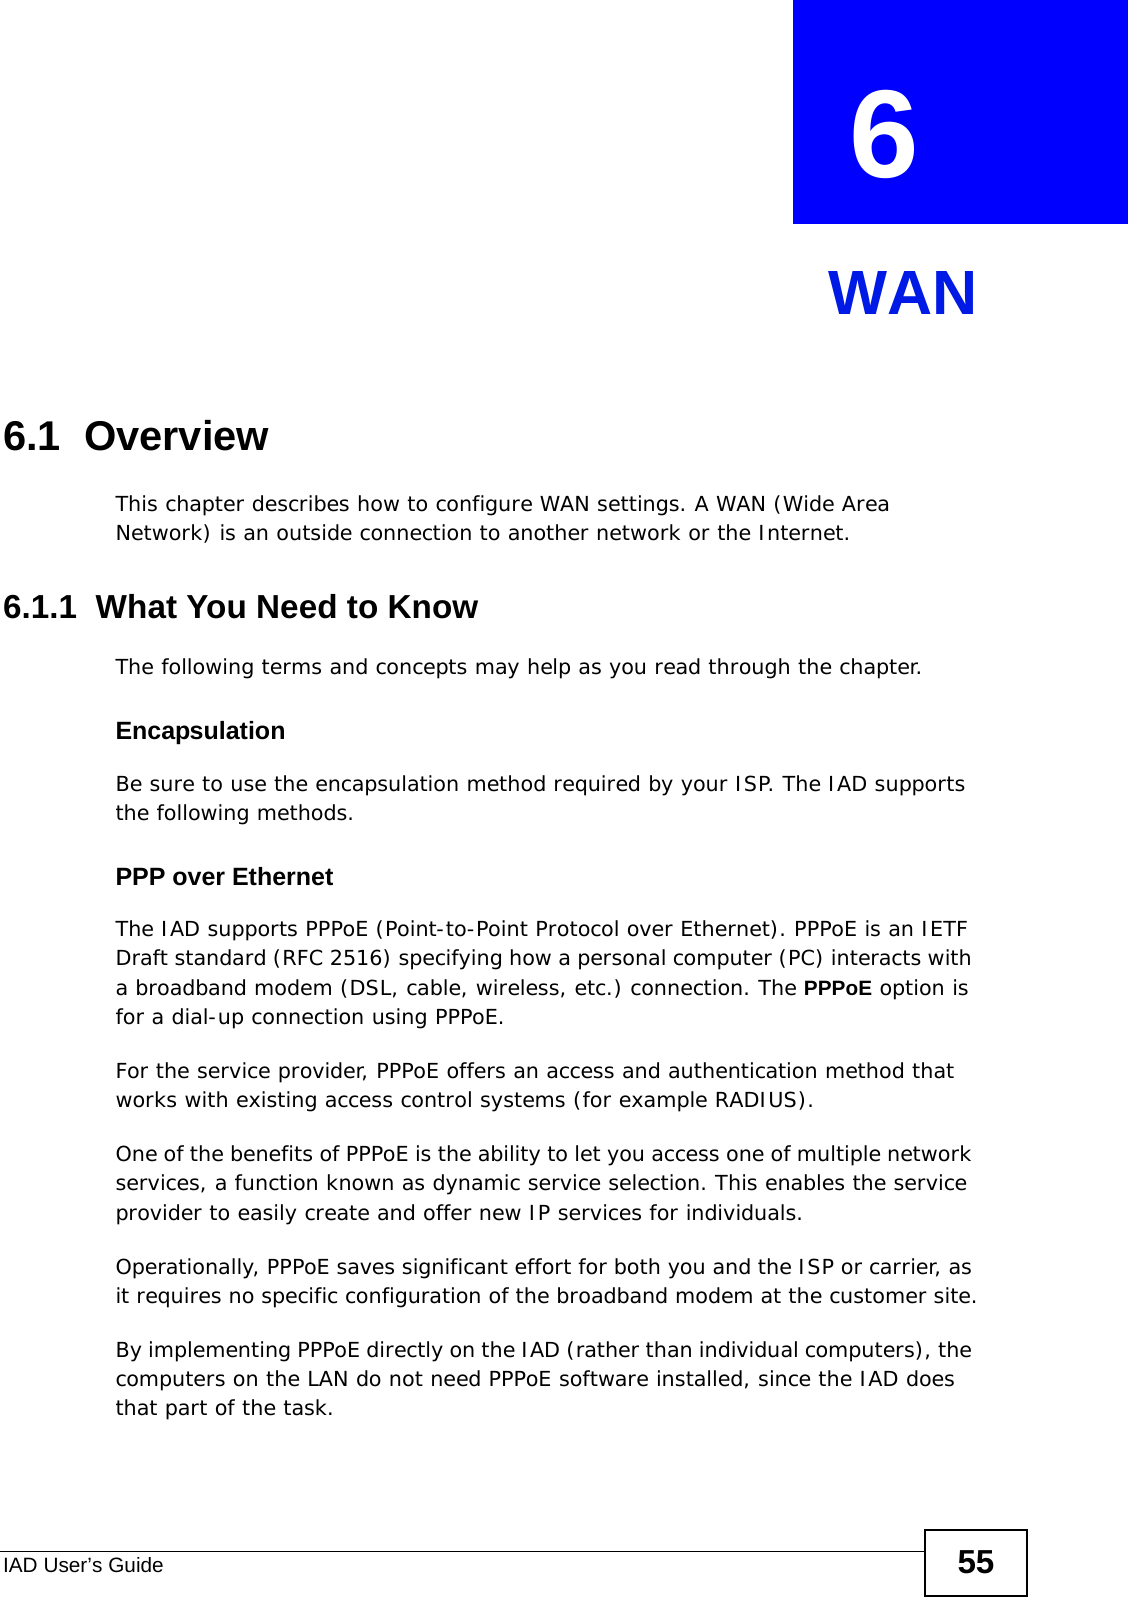 IAD User’s Guide 55CHAPTER  6 WAN6.1  OverviewThis chapter describes how to configure WAN settings. A WAN (Wide Area Network) is an outside connection to another network or the Internet.6.1.1  What You Need to KnowThe following terms and concepts may help as you read through the chapter.EncapsulationBe sure to use the encapsulation method required by your ISP. The IAD supports the following methods.PPP over EthernetThe IAD supports PPPoE (Point-to-Point Protocol over Ethernet). PPPoE is an IETF Draft standard (RFC 2516) specifying how a personal computer (PC) interacts with a broadband modem (DSL, cable, wireless, etc.) connection. The PPPoE option is for a dial-up connection using PPPoE.For the service provider, PPPoE offers an access and authentication method that works with existing access control systems (for example RADIUS).One of the benefits of PPPoE is the ability to let you access one of multiple network services, a function known as dynamic service selection. This enables the service provider to easily create and offer new IP services for individuals.Operationally, PPPoE saves significant effort for both you and the ISP or carrier, as it requires no specific configuration of the broadband modem at the customer site.By implementing PPPoE directly on the IAD (rather than individual computers), the computers on the LAN do not need PPPoE software installed, since the IAD does that part of the task.